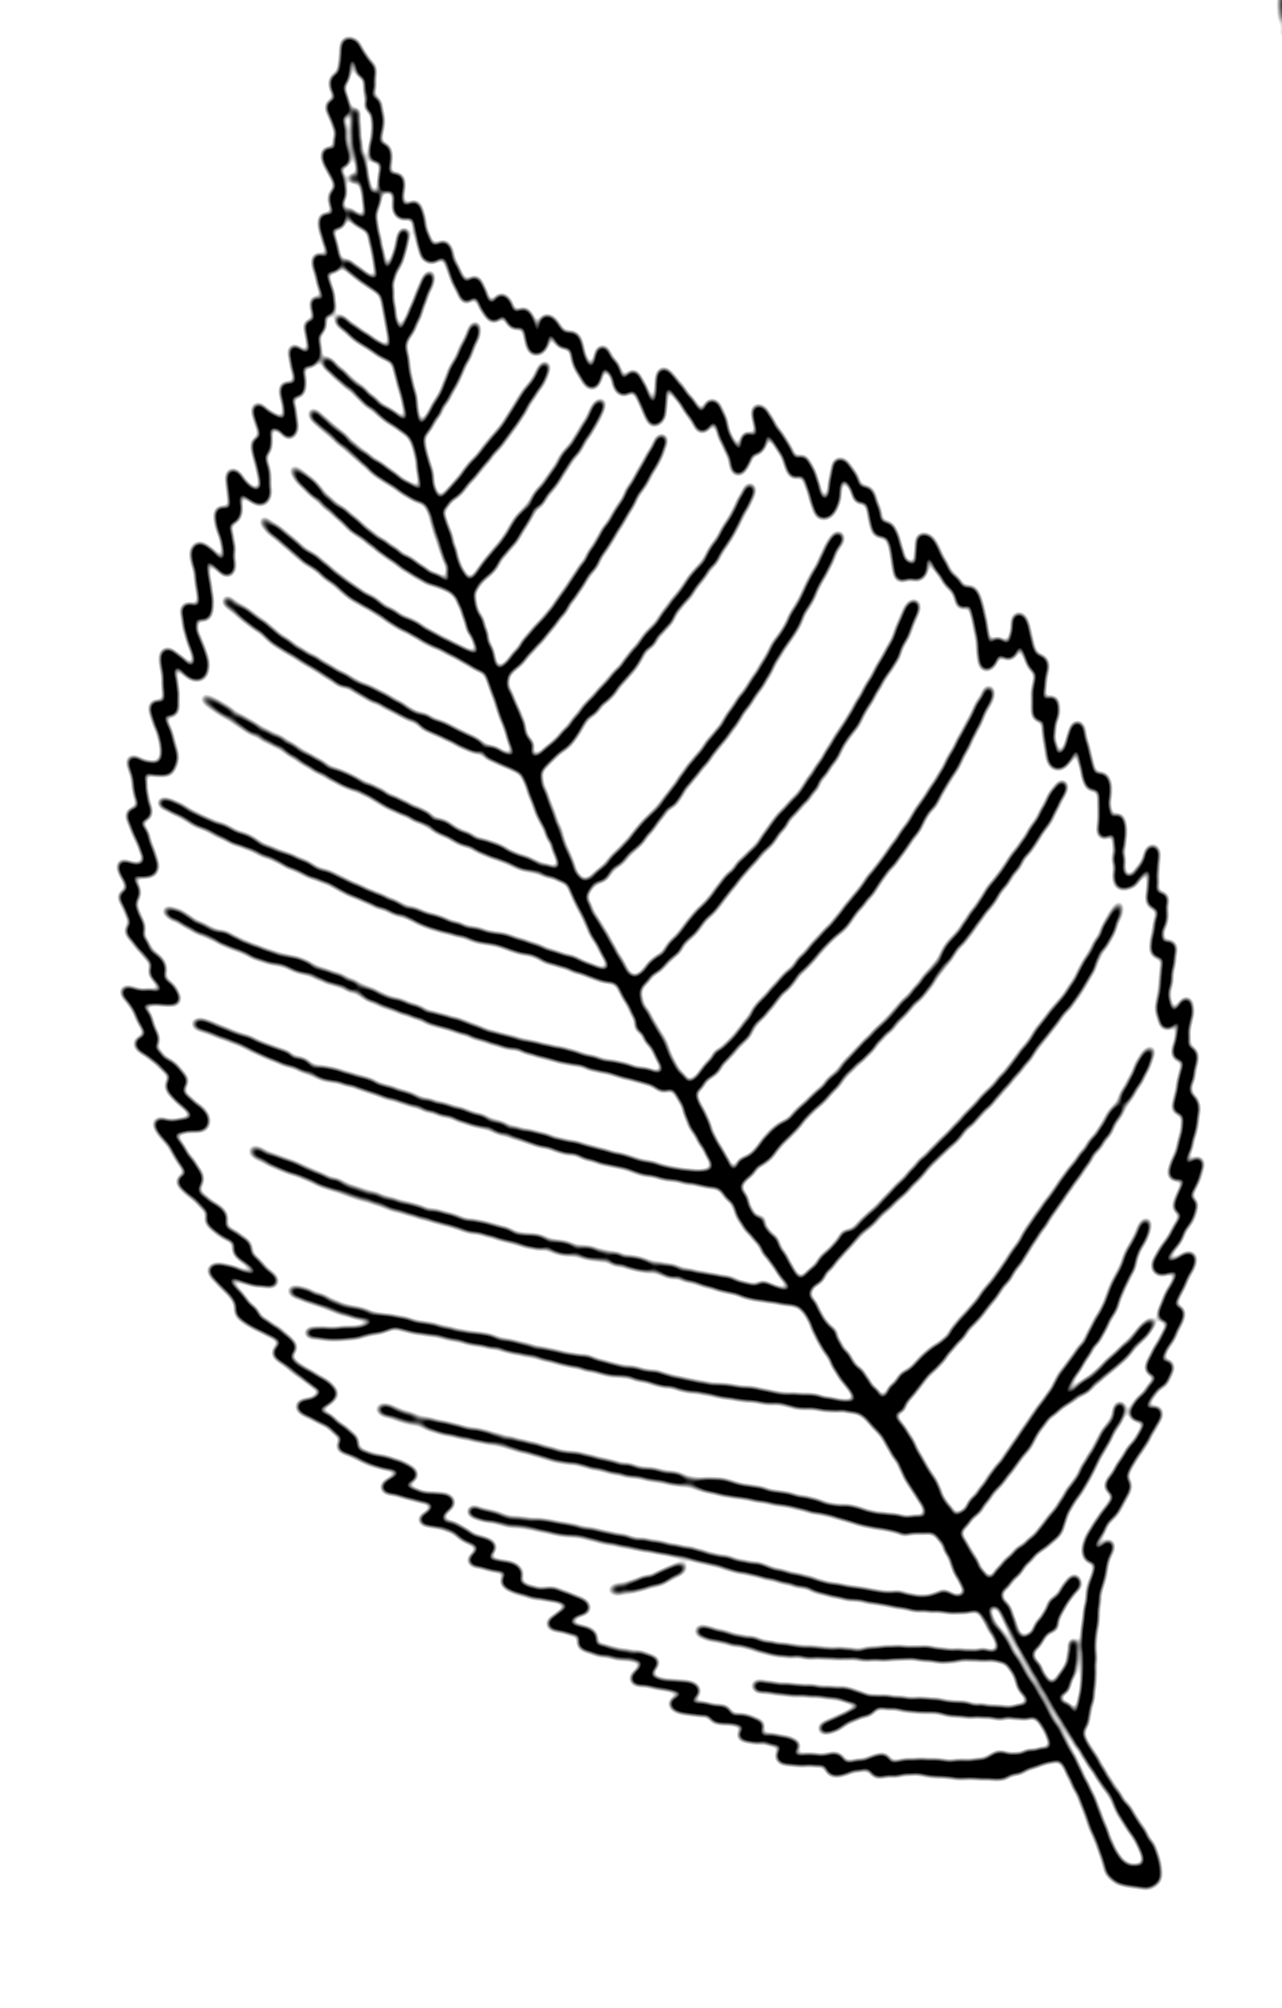 Leaf Draw Image - ClipArt Best